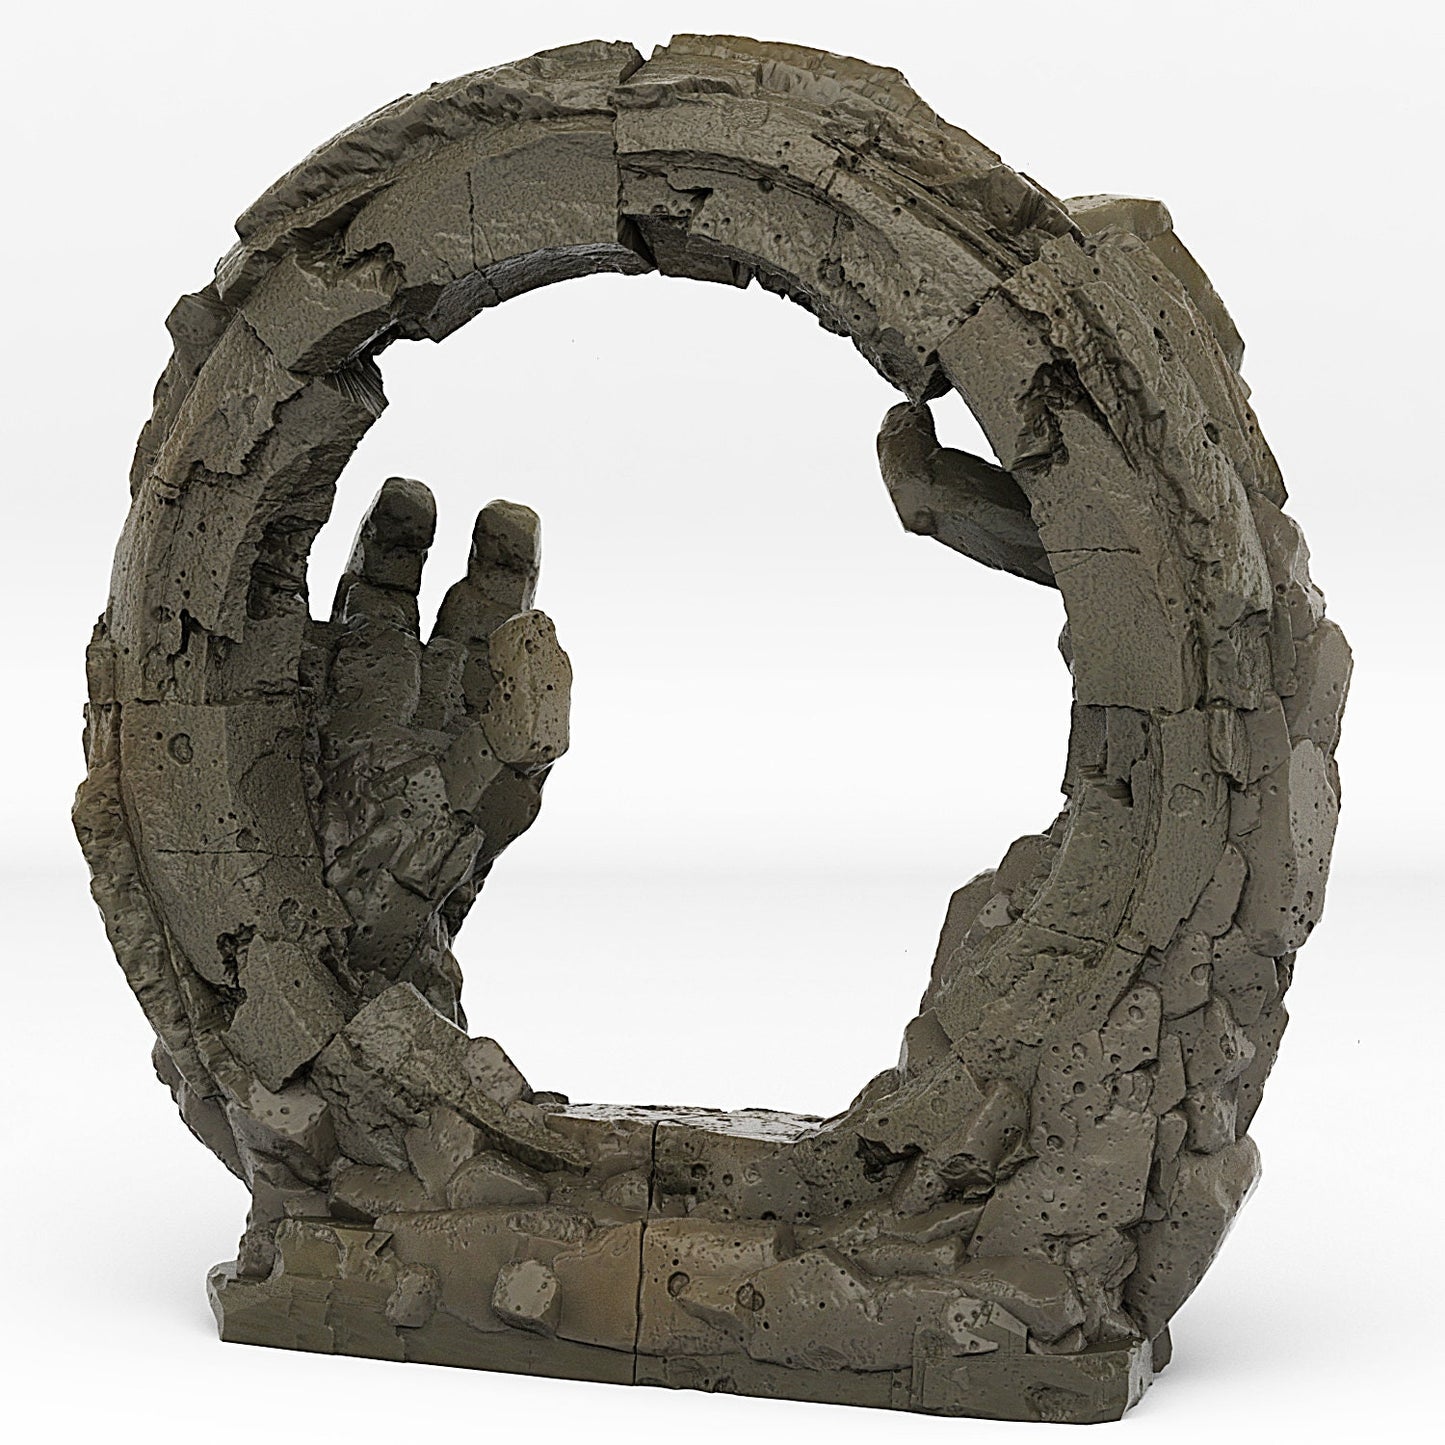 Golem Portal | Scenery and terrain | 3D Printed Resin Miniature | Tabletop Role Playing | AoS | D&D | 40K | Pathfinder